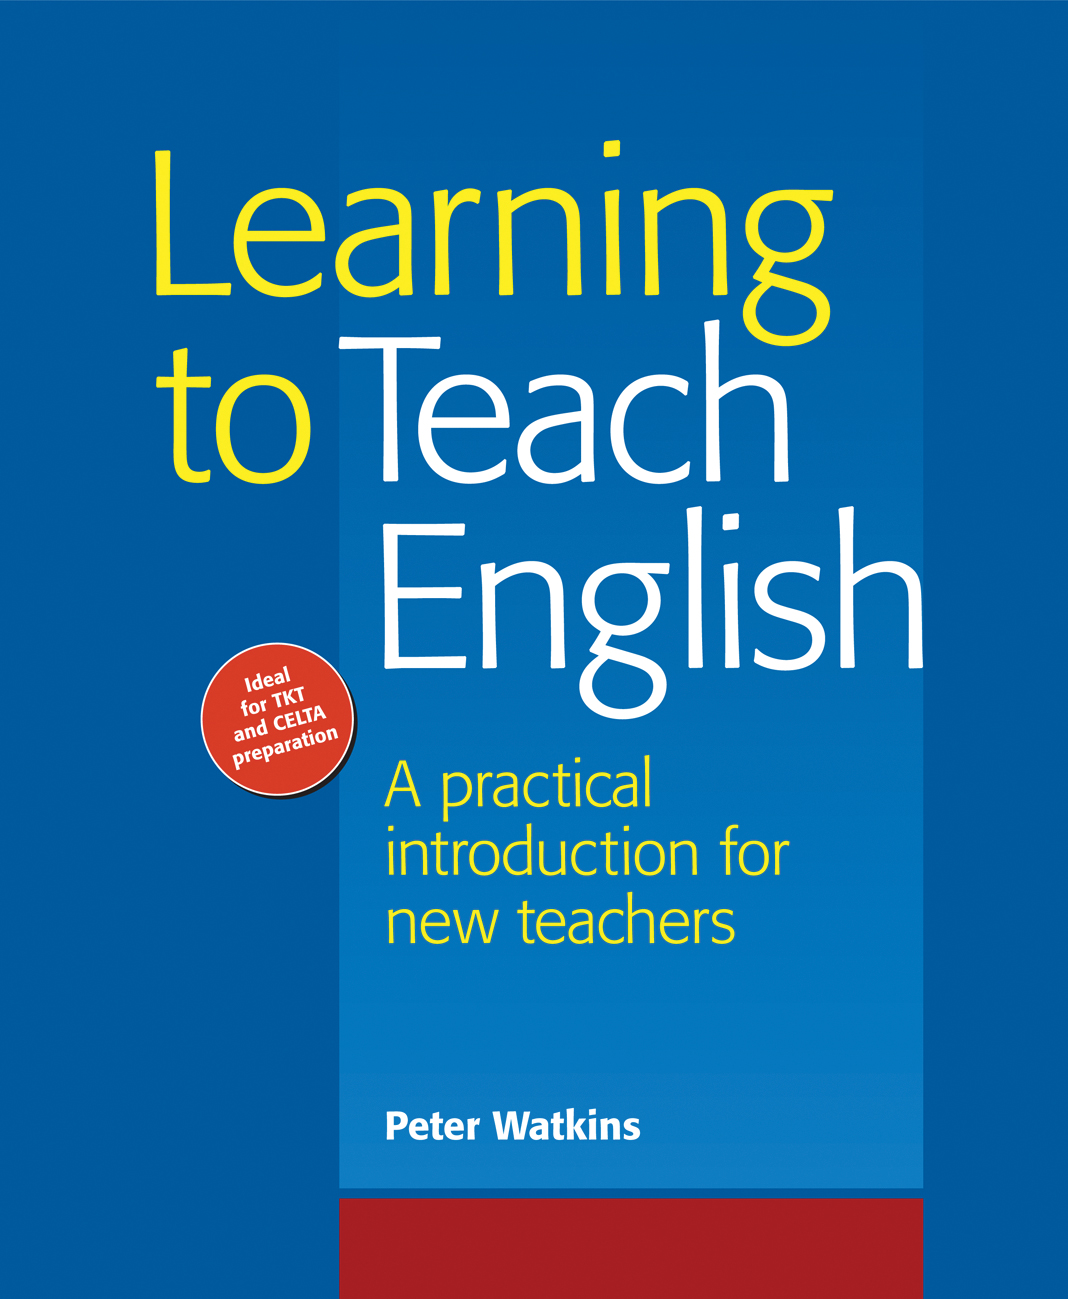 learning-to-teach-english-student-book-by-cengage-learning-on